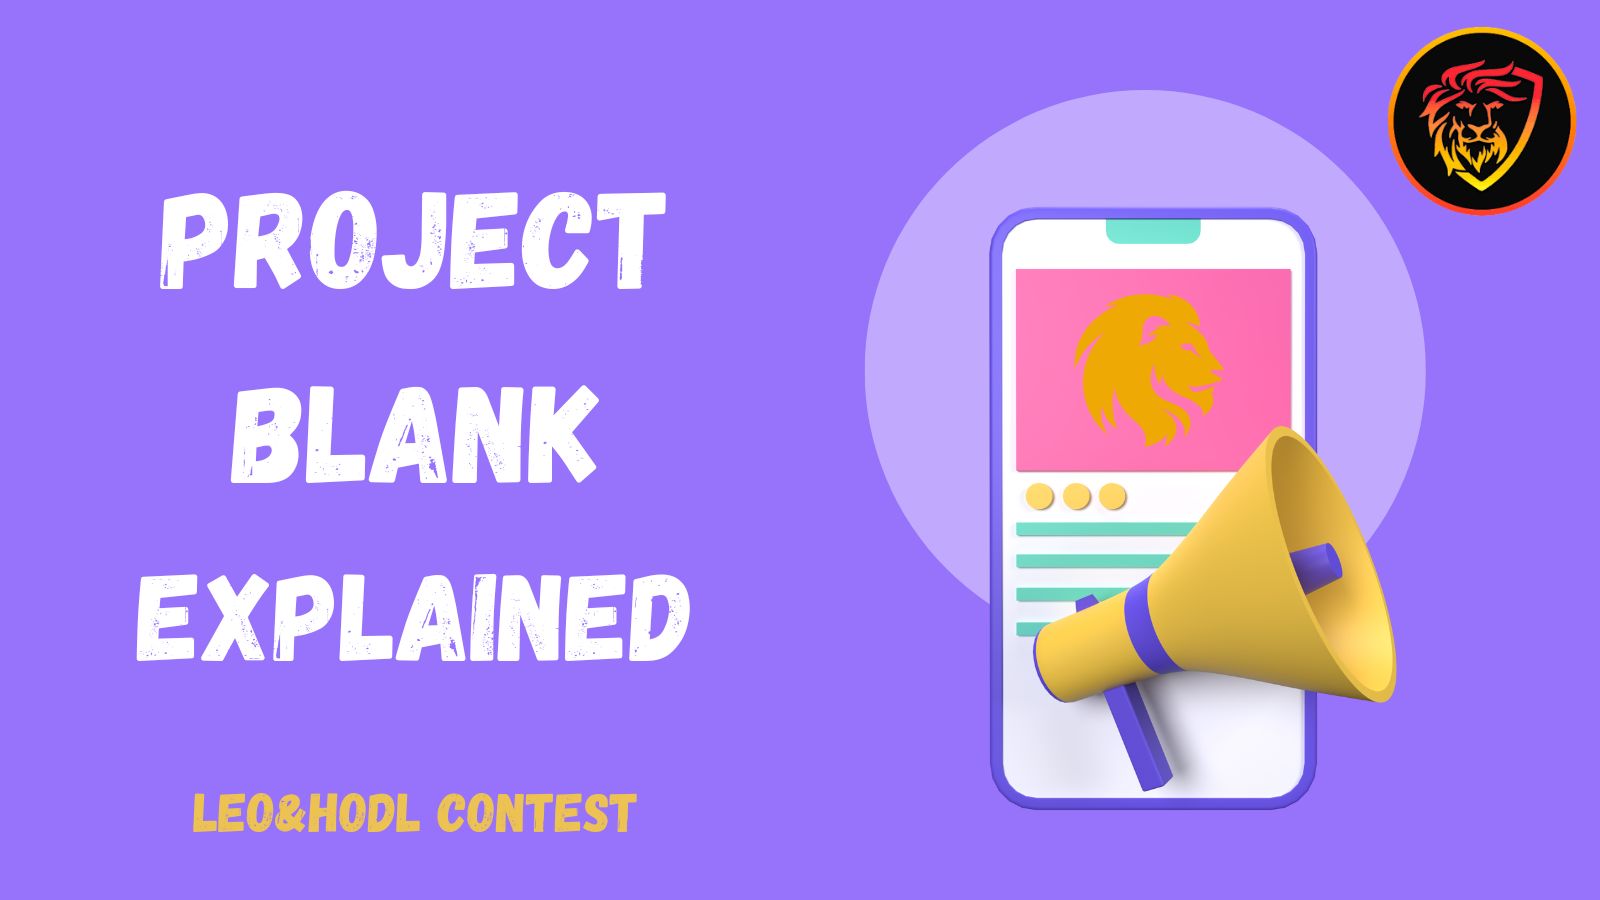 @idiosyncratic1/leo-and-hodl-contest-focus-project-blank-explored